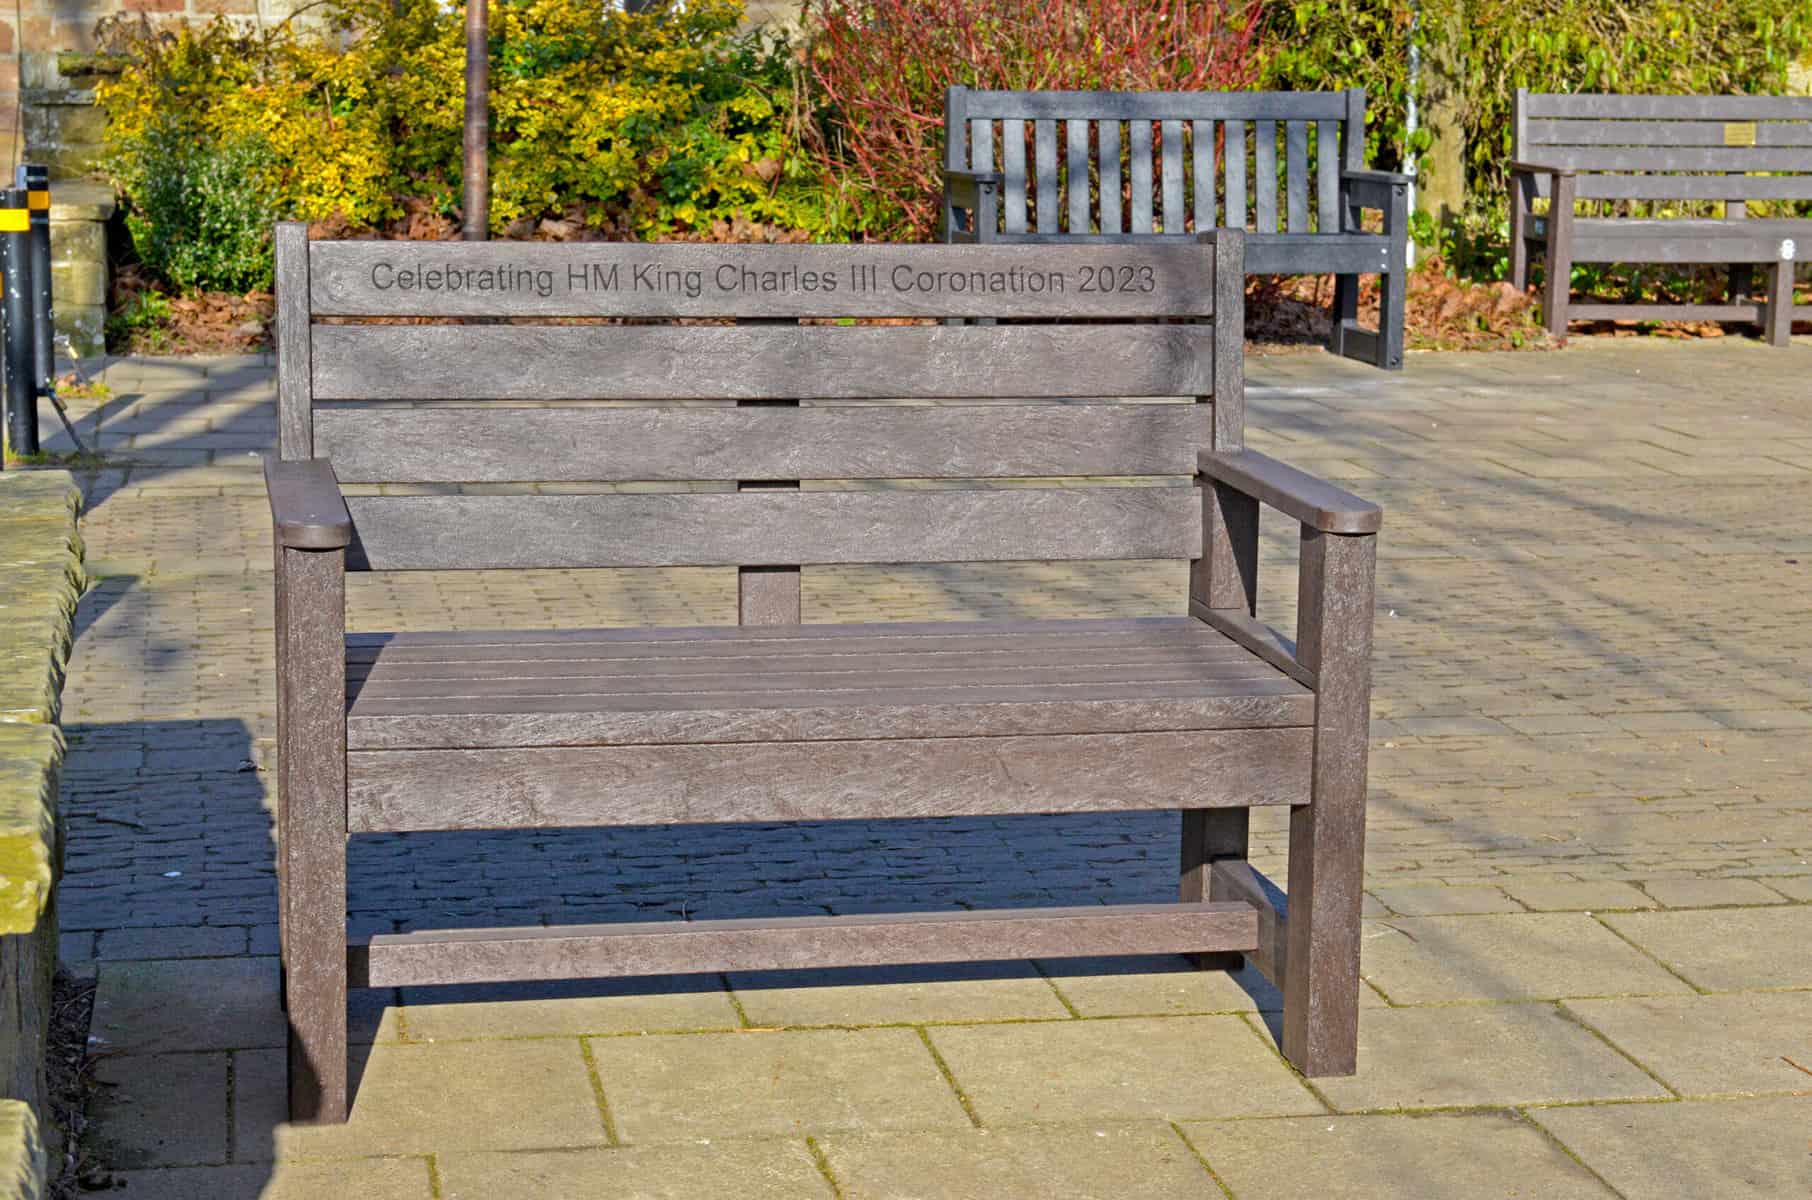 King Charles III coronation commemorative two seater bench with Engraving. Made from recycled plastic TDP Wirksworth 1.2m in brown with a black dale in the background